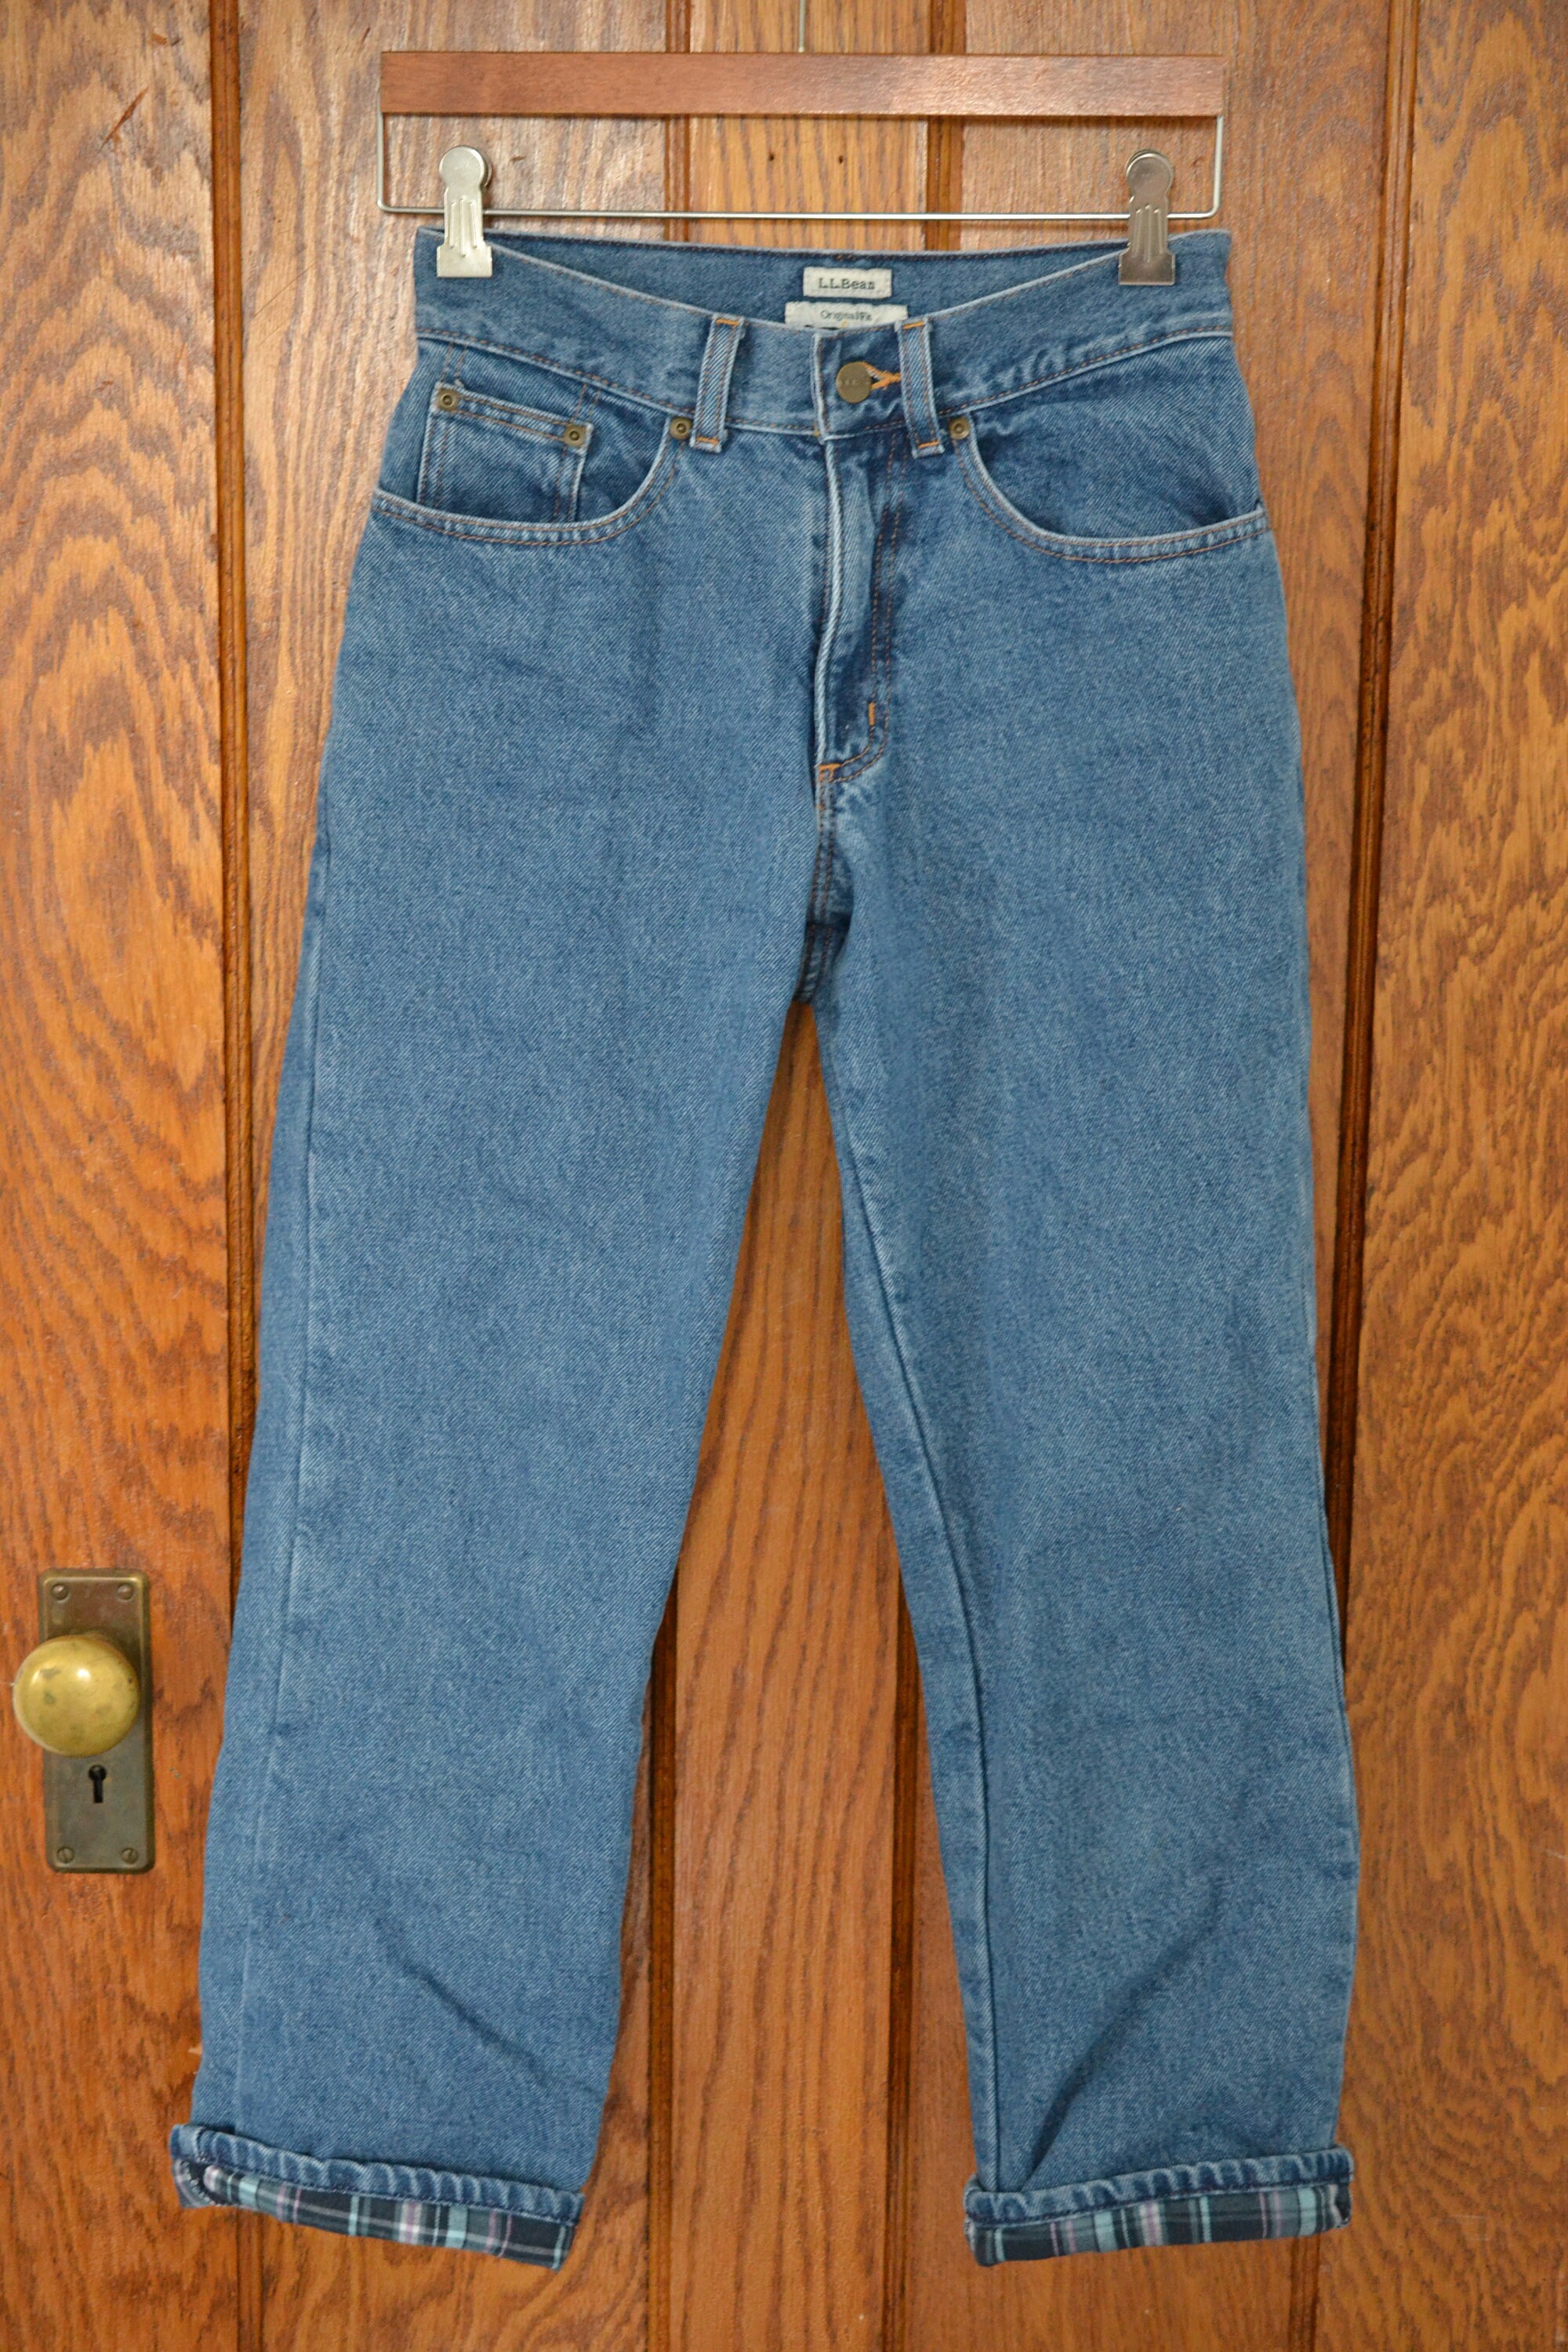 LL Bean Lined Jeans | Etsy